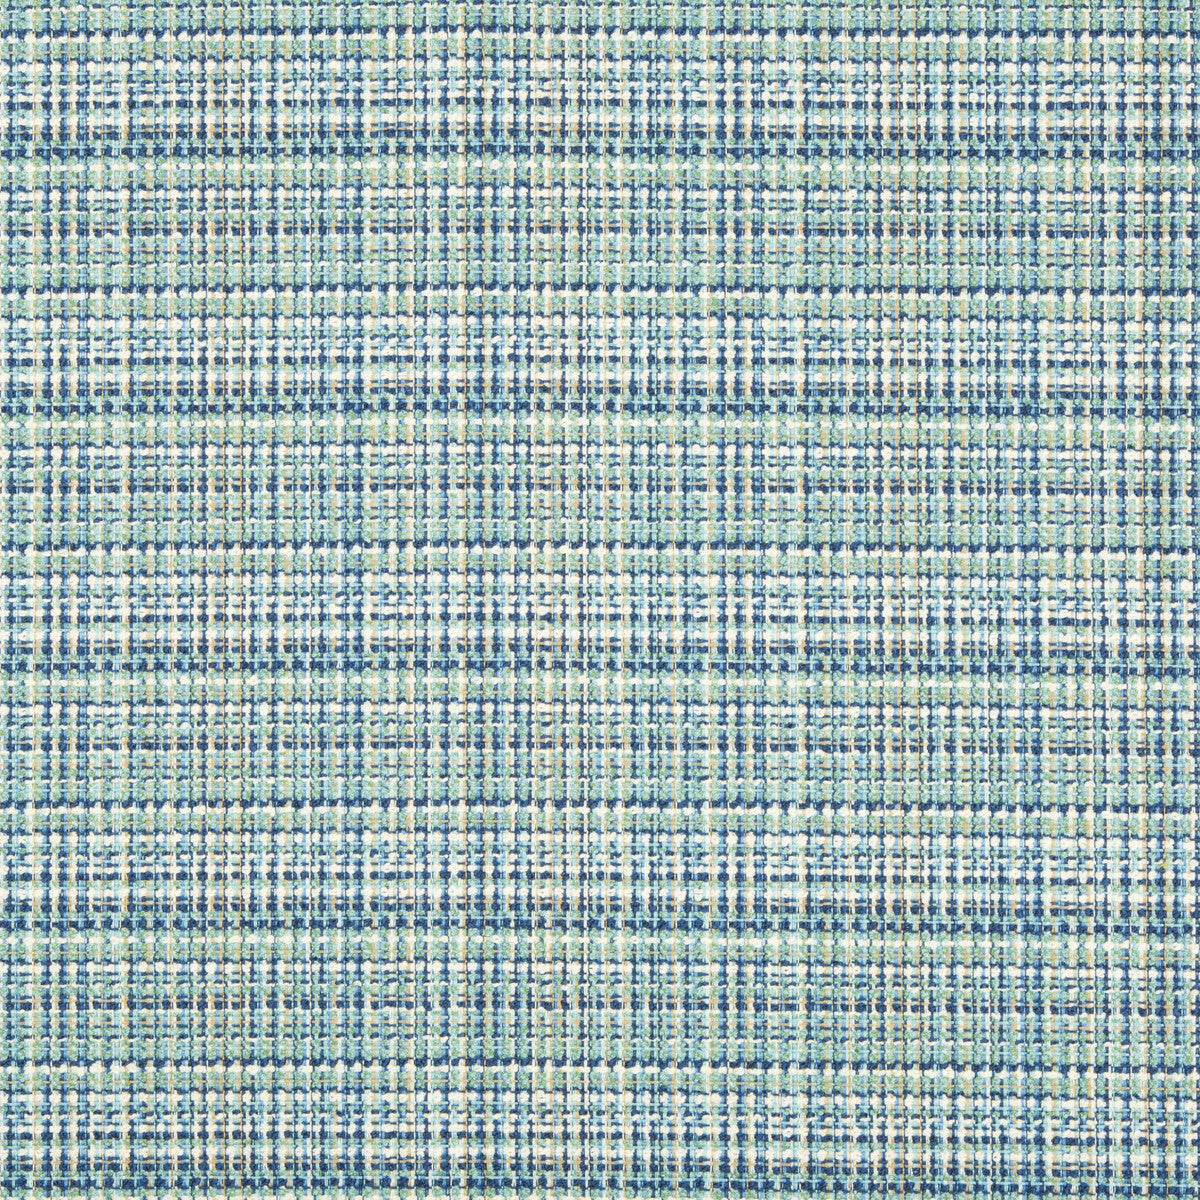 Vibrata fabric in ocean color - pattern 34501.513.0 - by Kravet Design in the Echo Indoor Outdoor Ibiza collection